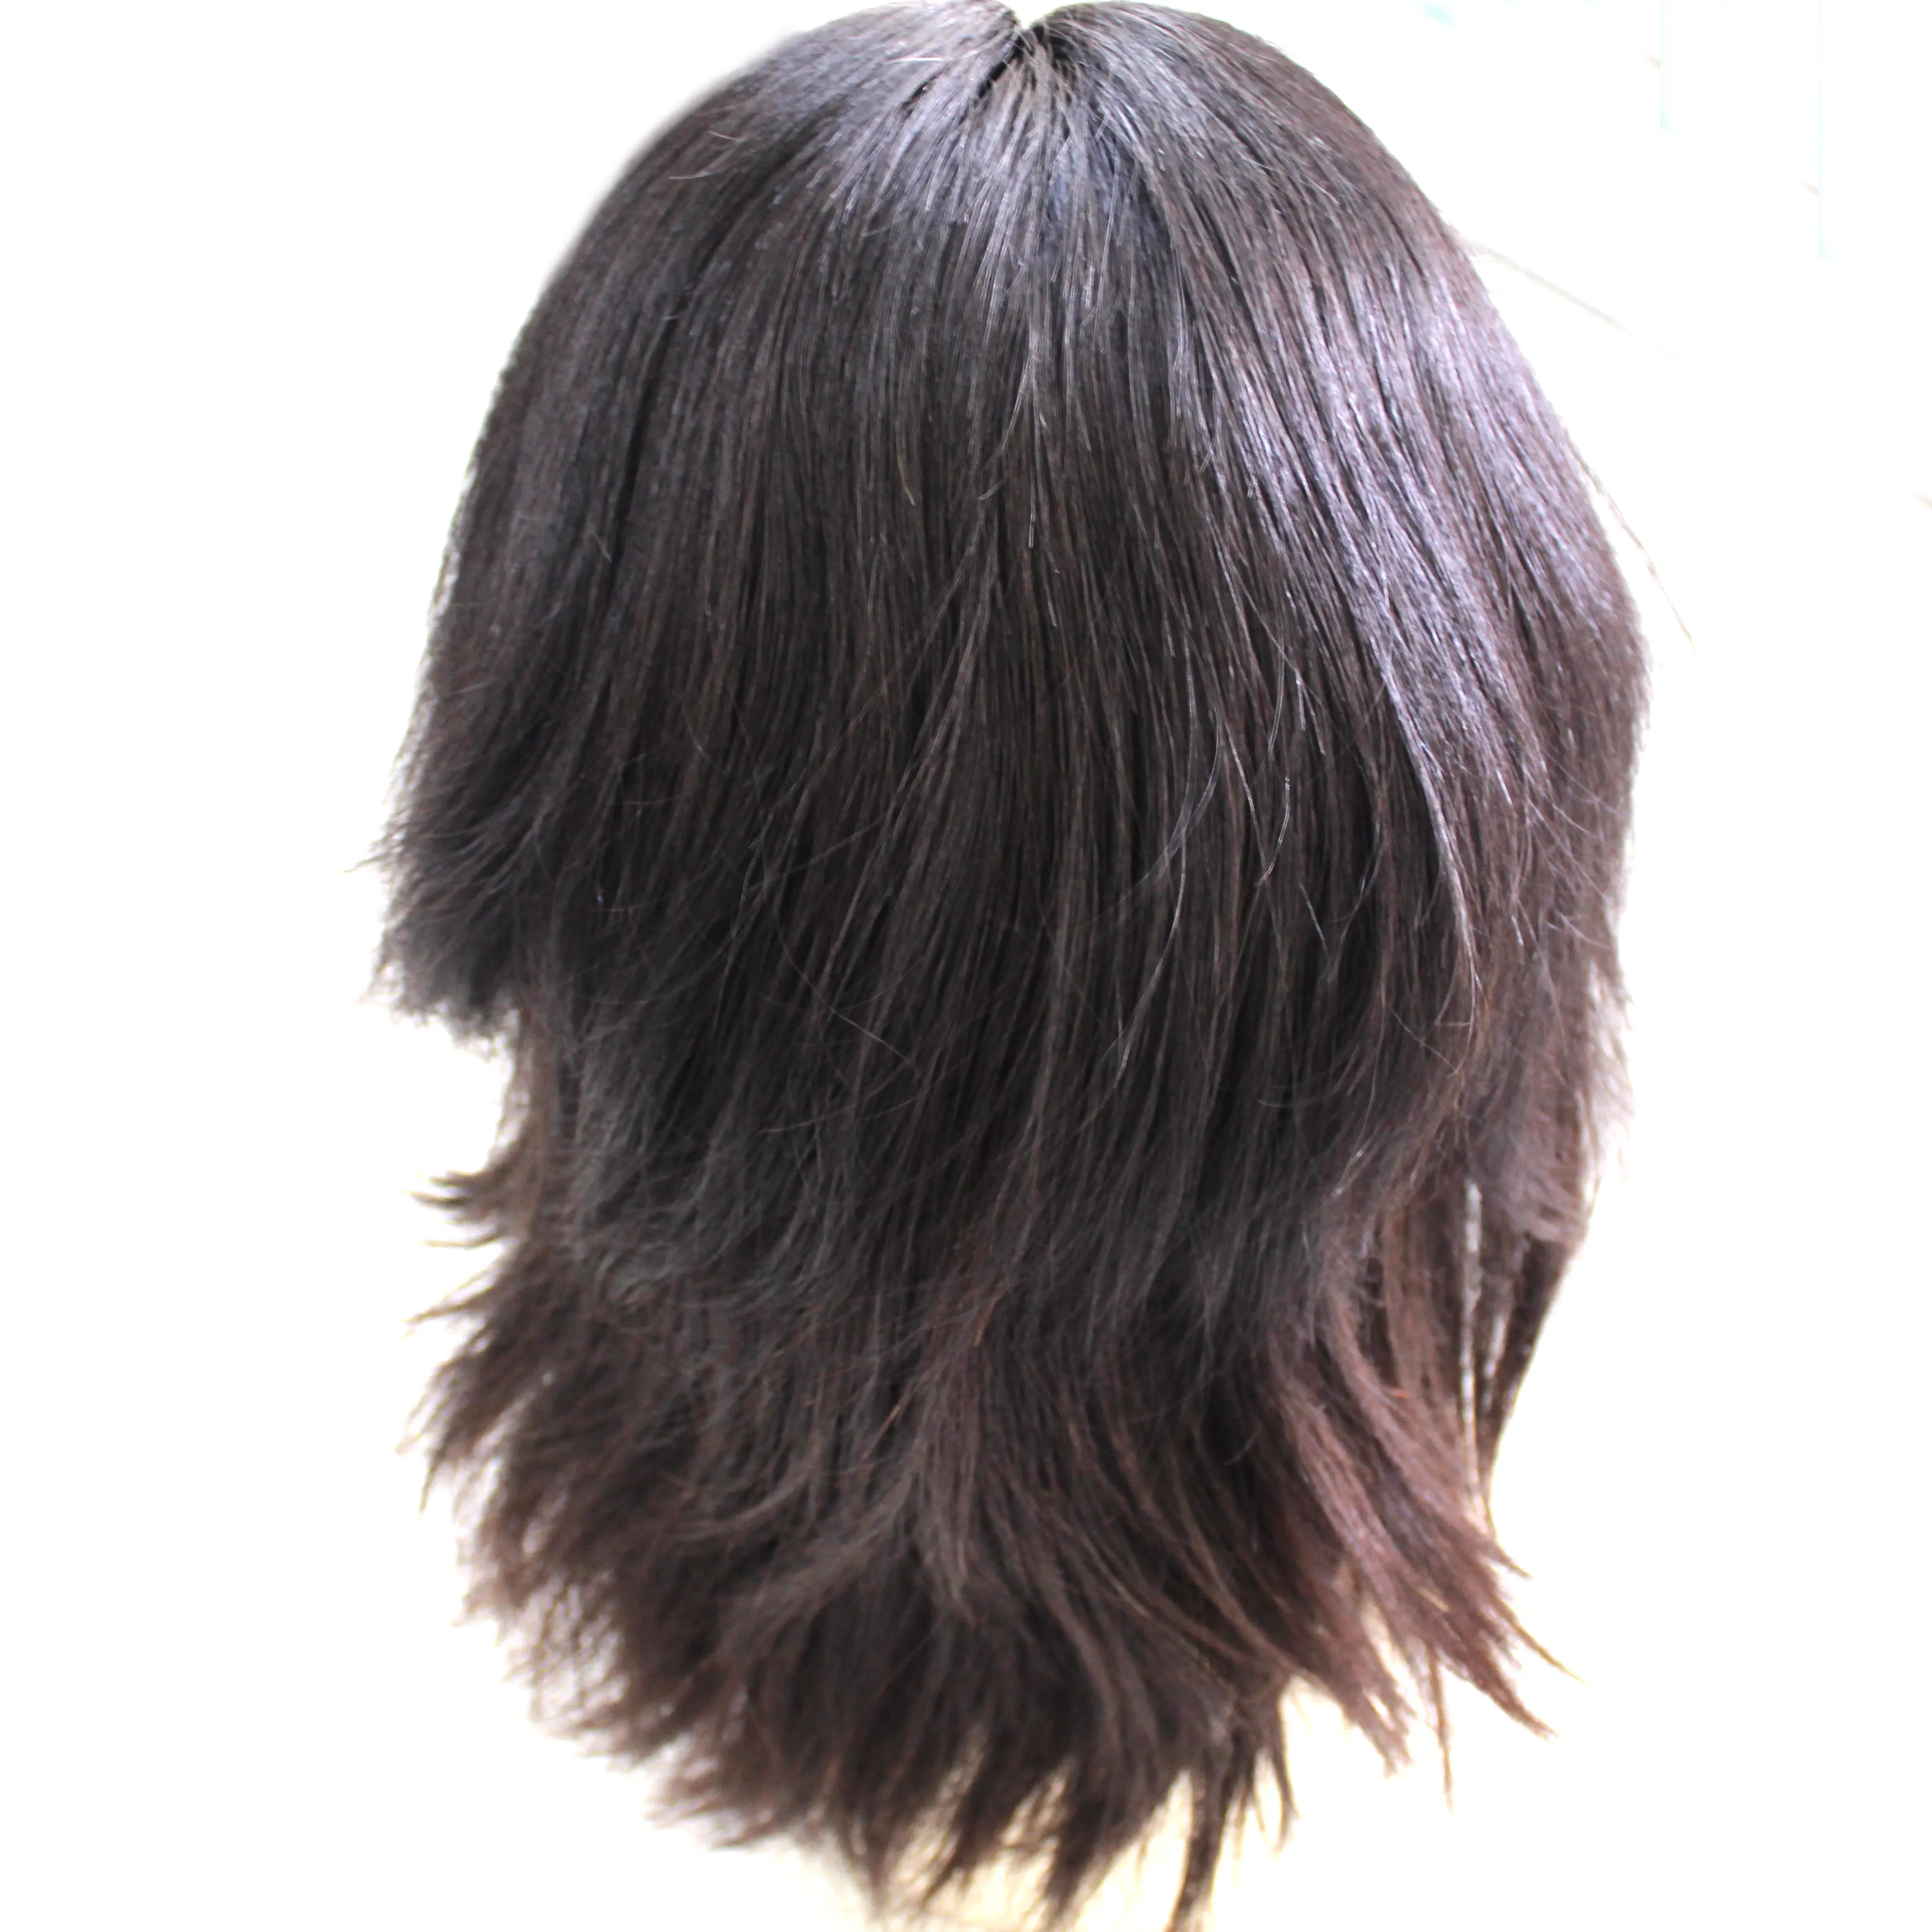 Cheap lace front wig with baby hair hand tide 100% human, Shipping Now High Digital Thin HD Lace Frontal Closure